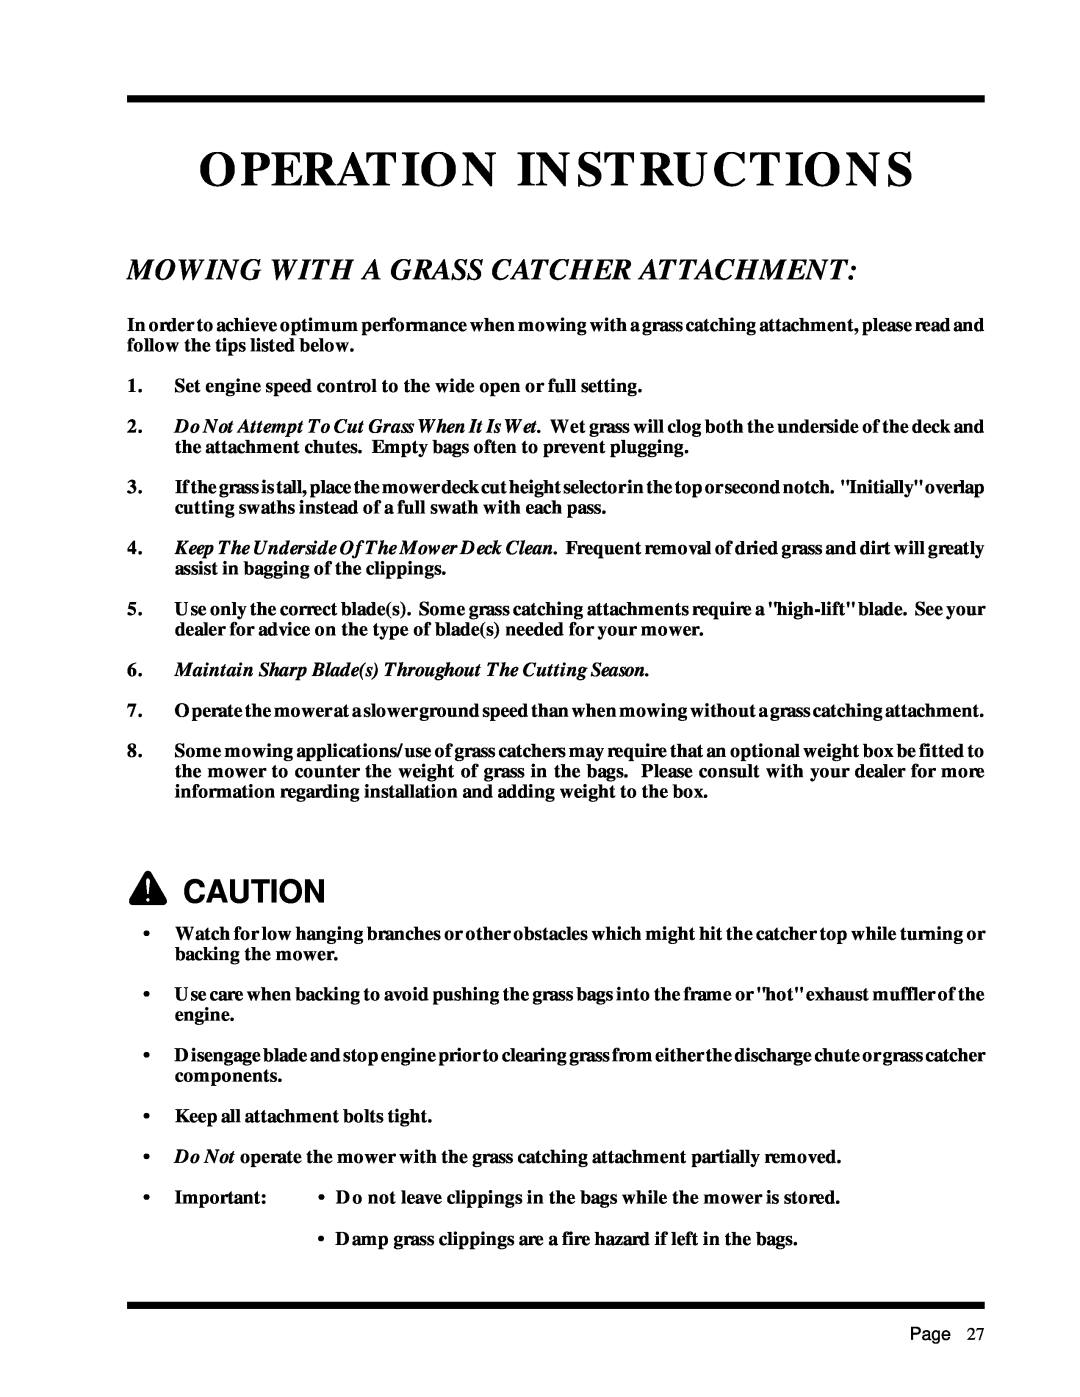 Dixon 6520-1099, ZTR 3303, ZTR 3304, 1855-0599 manual Mowing With A Grass Catcher Attachment, Operation Instructions 